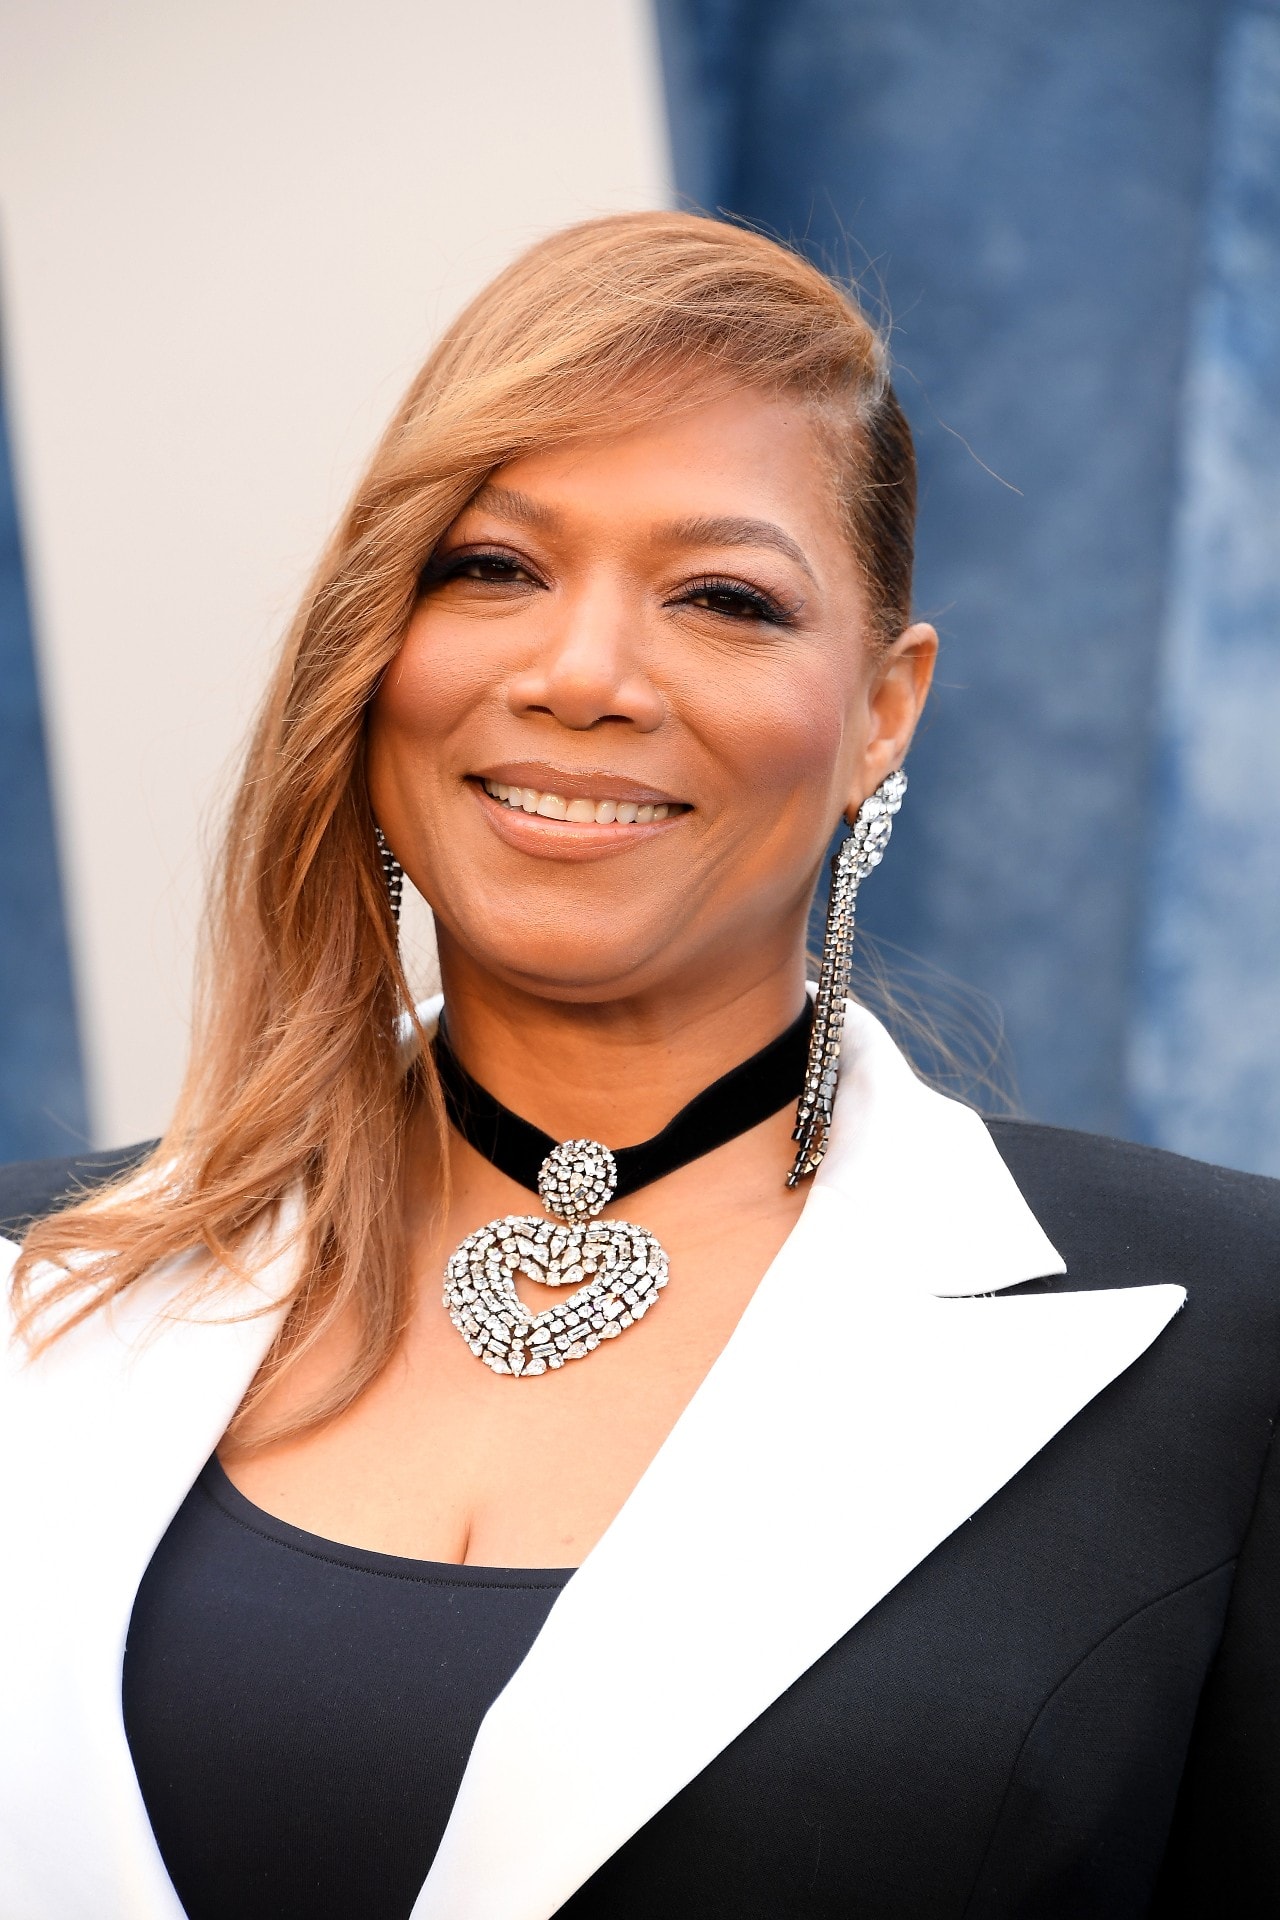 queen latifah history national recording registry info the library of congress rap album all hail the queen music 1989